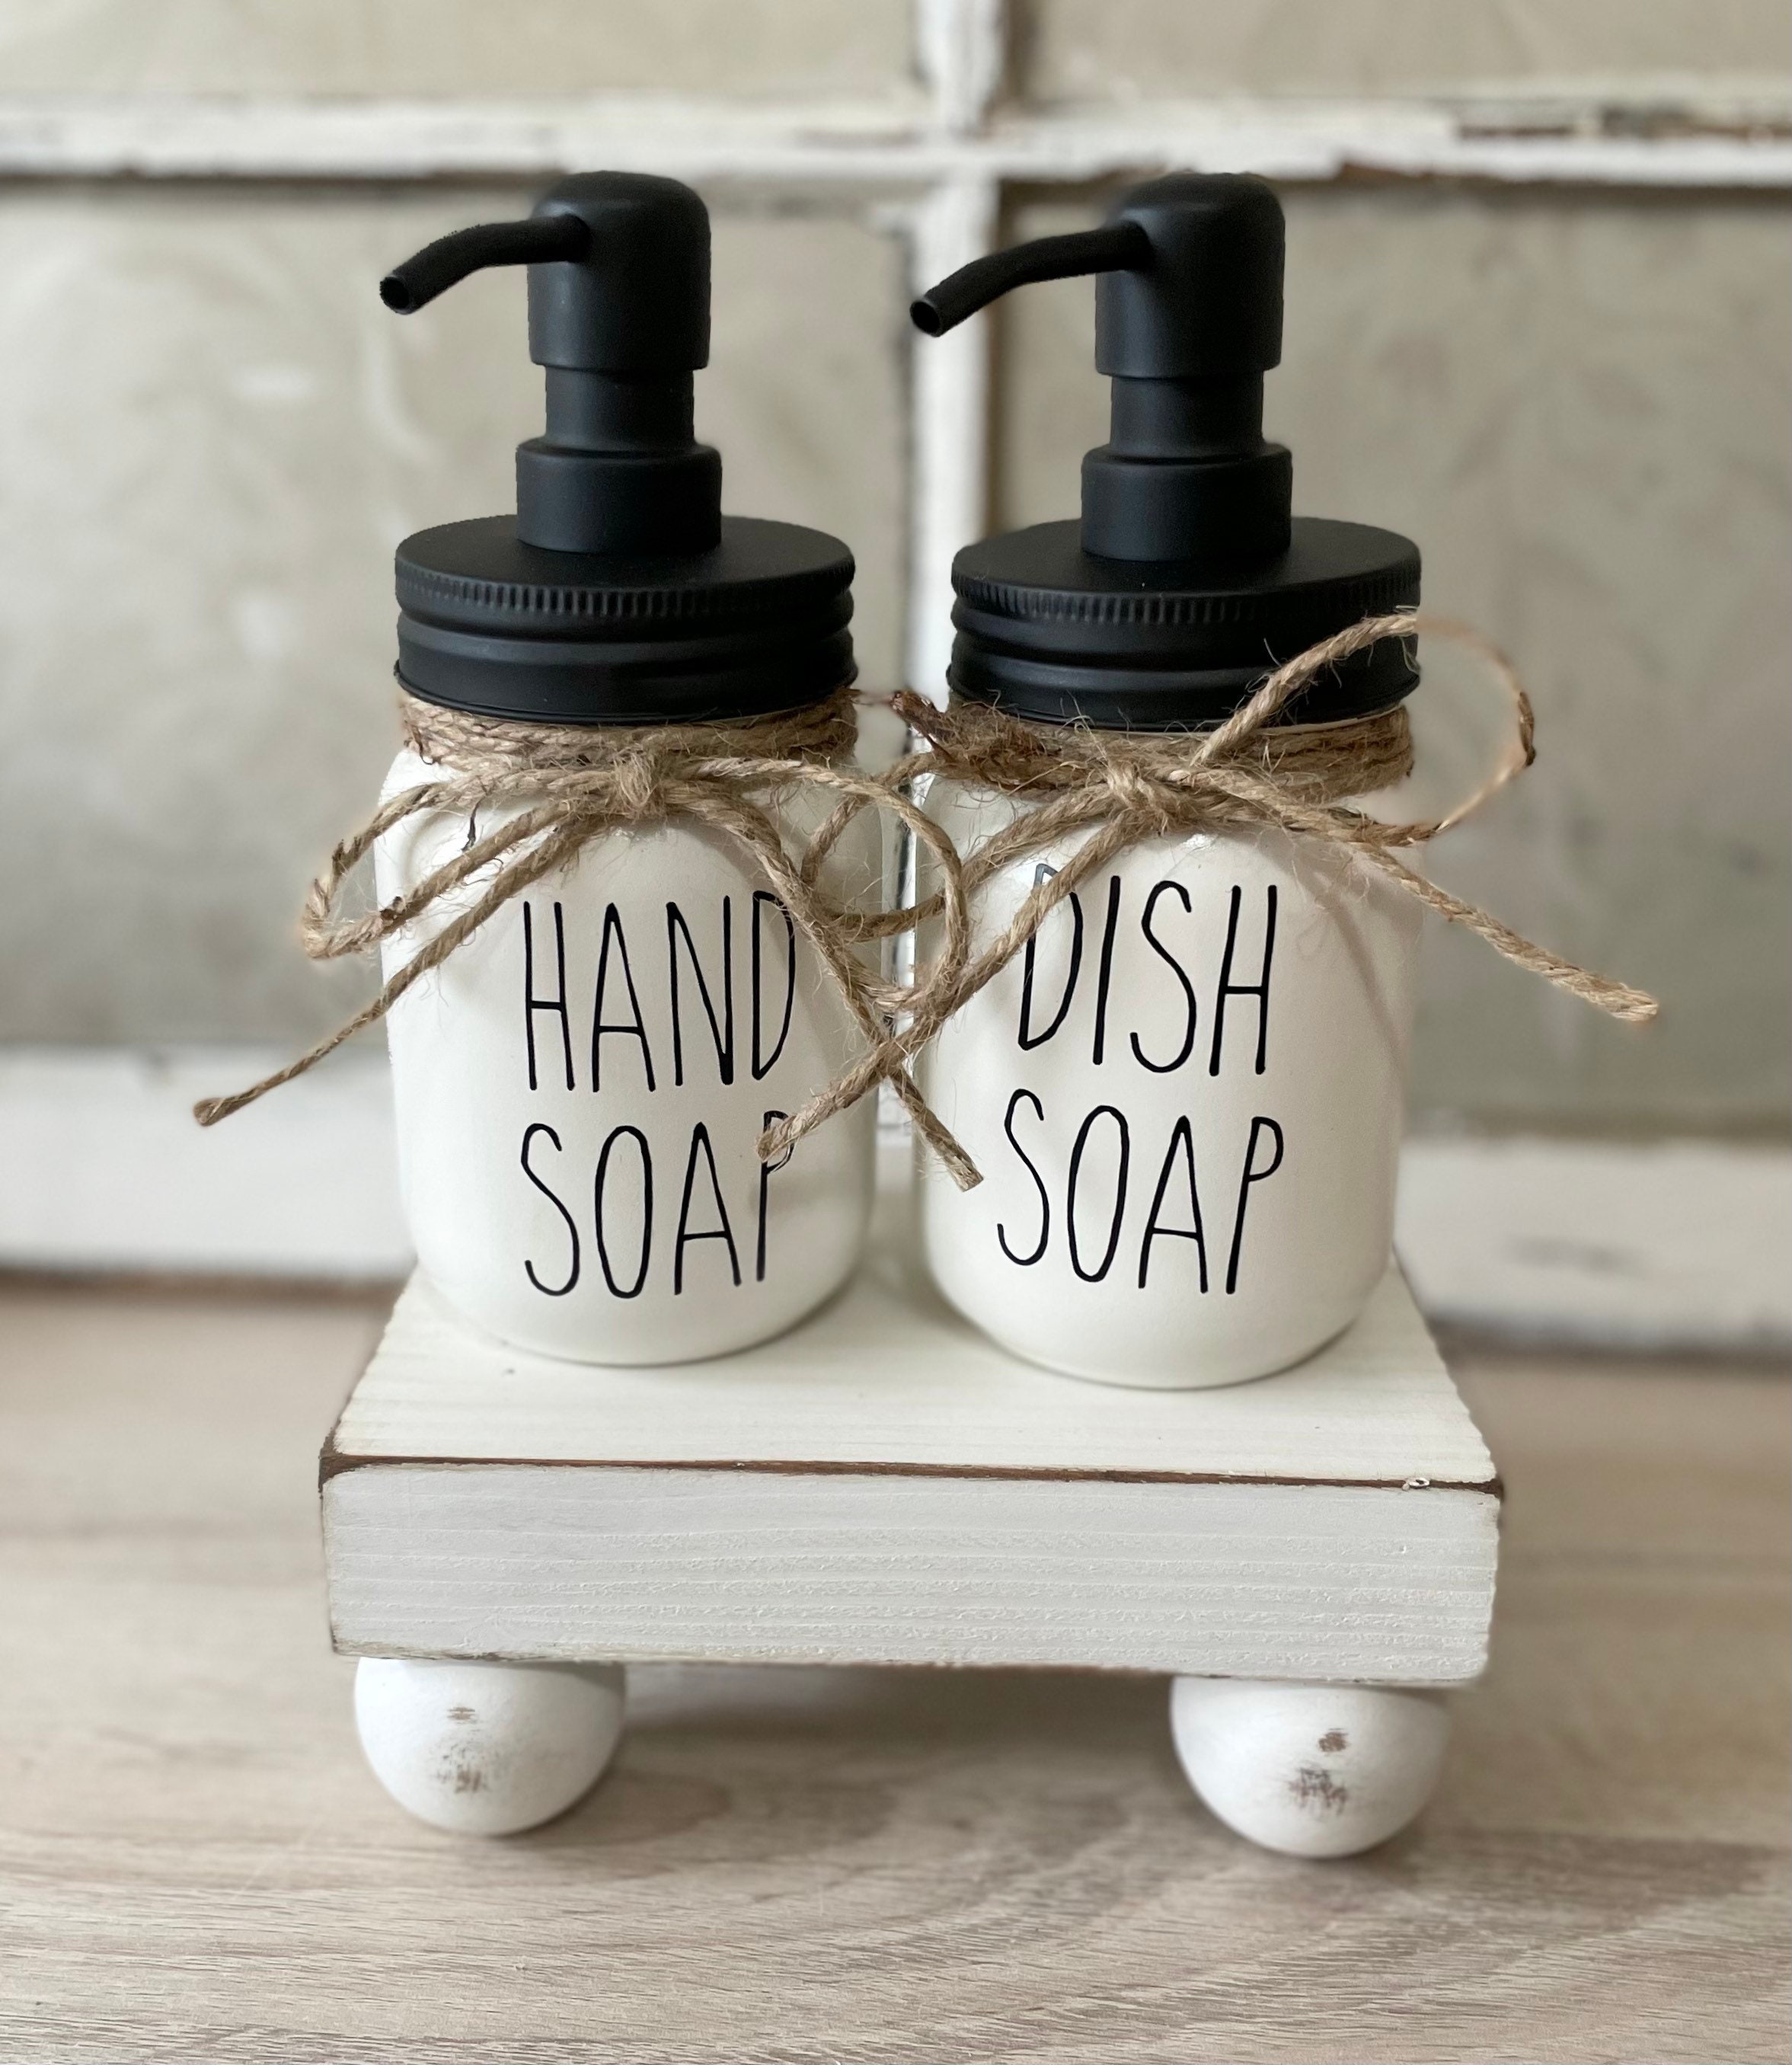 Farmhouse Chunky Riser Tray and Dish Soap and Hand Soap Dispensers